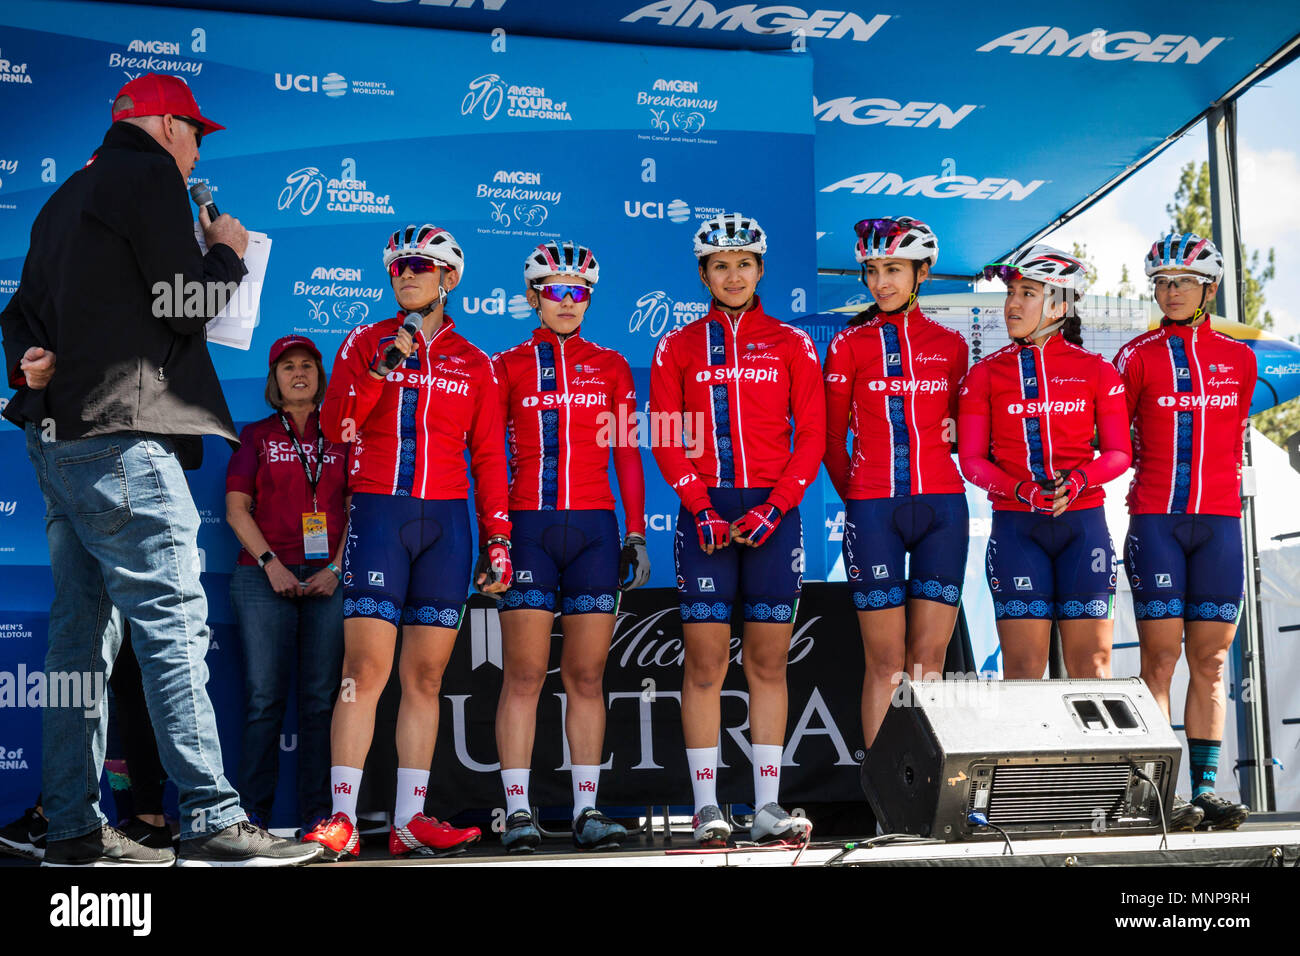 South Lake Tahoe, California, USA. 18th May, 2018. Friday, May 18, 2018.Emcee DAVE TOWLE introduces Swapit | Agolico Cycling Pro Team (MEX) before the start of Stage 2 of the Amgen Tour of California Women's Race empowered with SRAM, which starts and finishes near Heavenly Ski Resort in South Lake Tahoe, California.BIB, NAME, NAT.121, RAMÃªREZ FREGOSO, MEX.122, MU''žOZ GRANDON, CHI.123, PRIETO CASTA''žEDA, MEX.124, SALAZAR VAZQUEZ, MEX.125, SANTOYO PEREZ, MEX.126, VARGAS BARRIENTOS, CRC Credit: Tracy Barbutes/ZUMA Wire/Alamy Live News Stock Photo